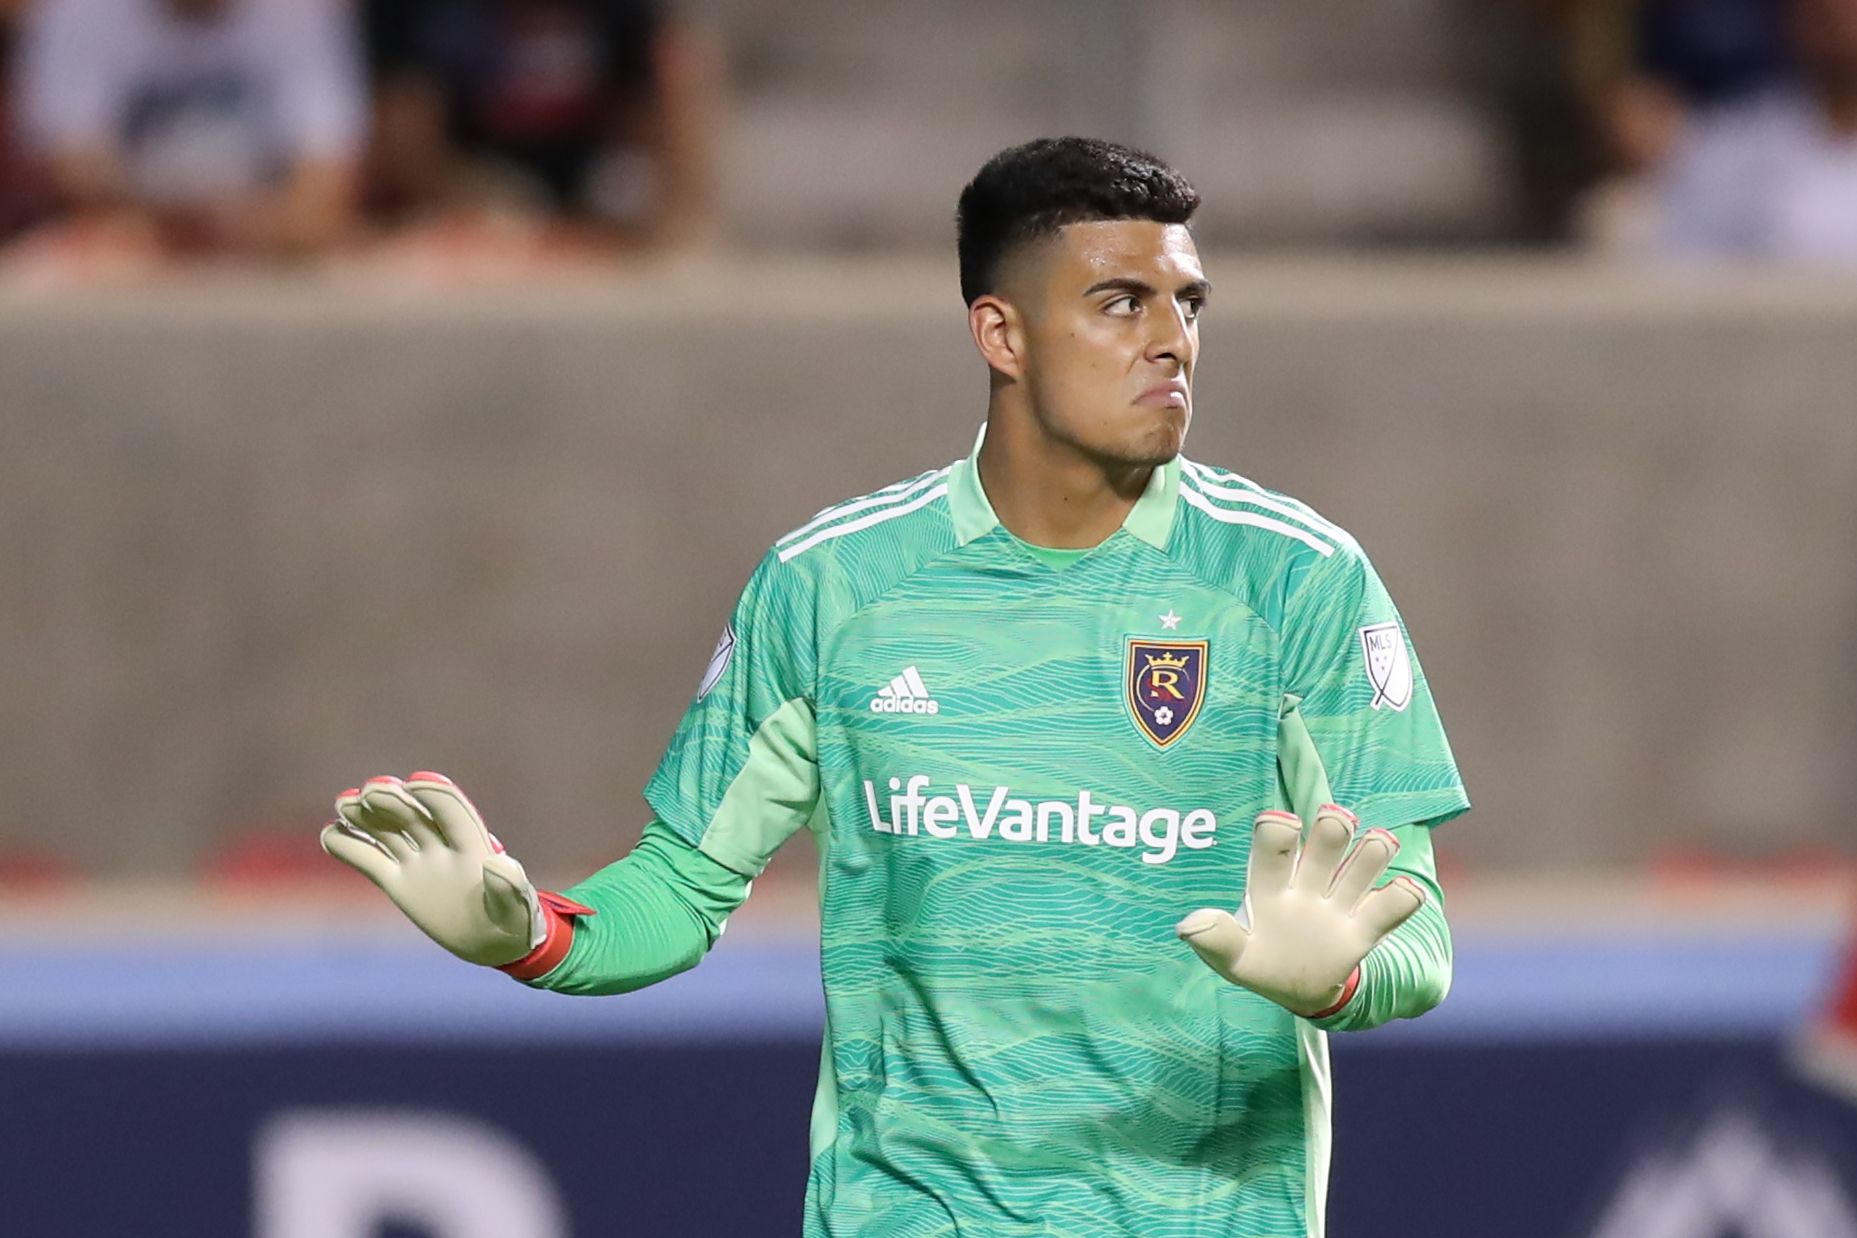 Jul 7, 2021; Sandy, Utah, CAN; Real Salt Lake goalkeeper David Ochoa (1) reacts to a play against the Vancouver Whitecaps in the second half at Rio Tinto Stadium. Mandatory Credit: Rob Gray-USA TODAY Sports